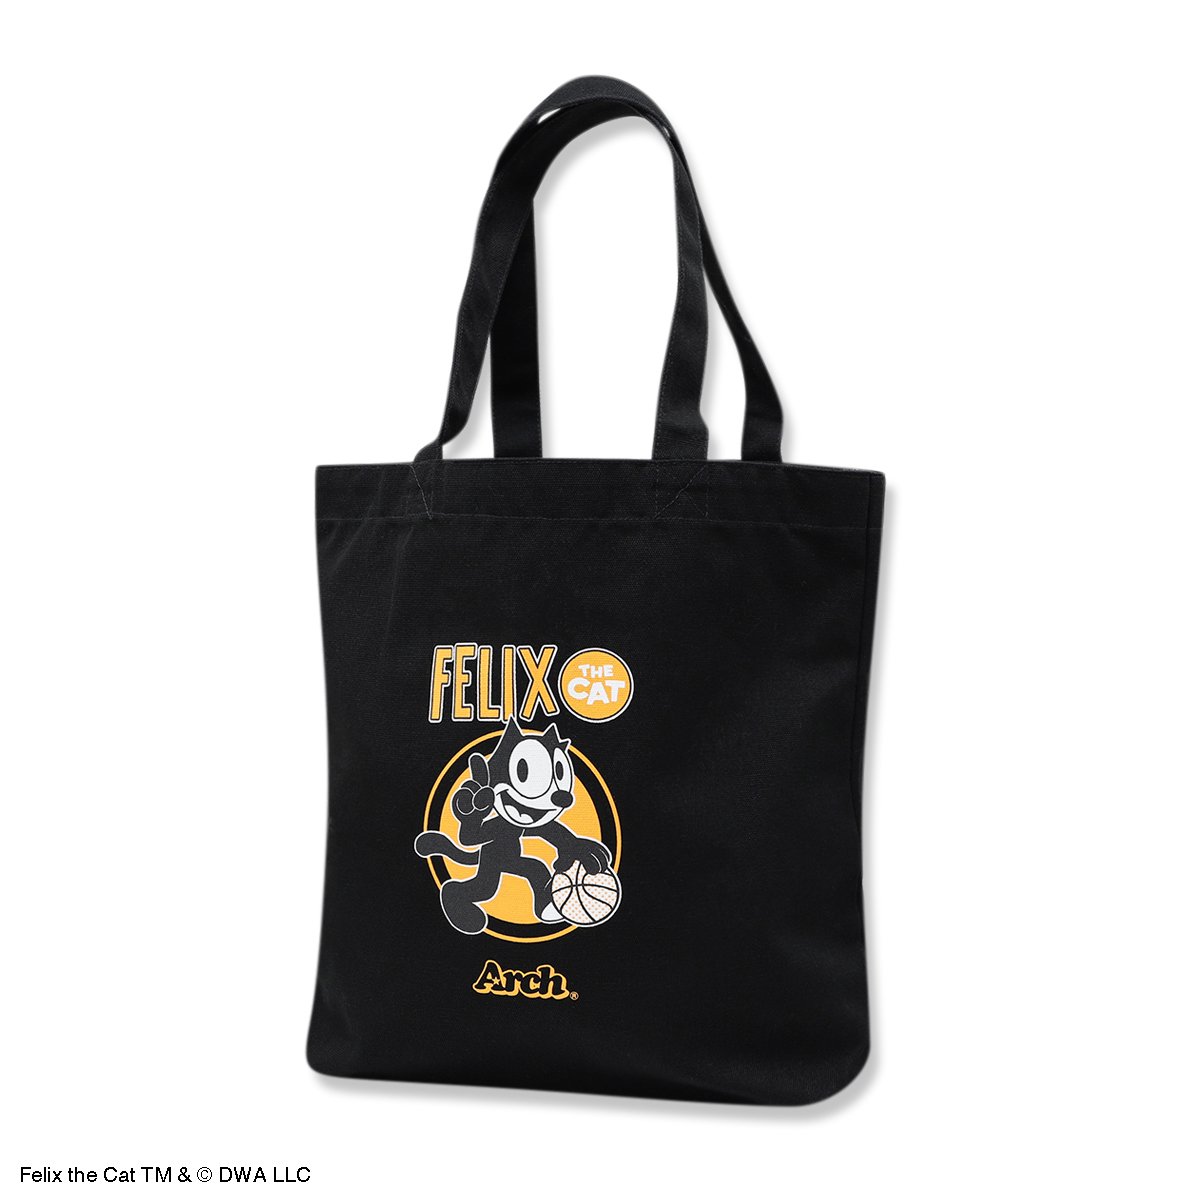 FELIX THE CAT | Arch playmaker tote bagblack